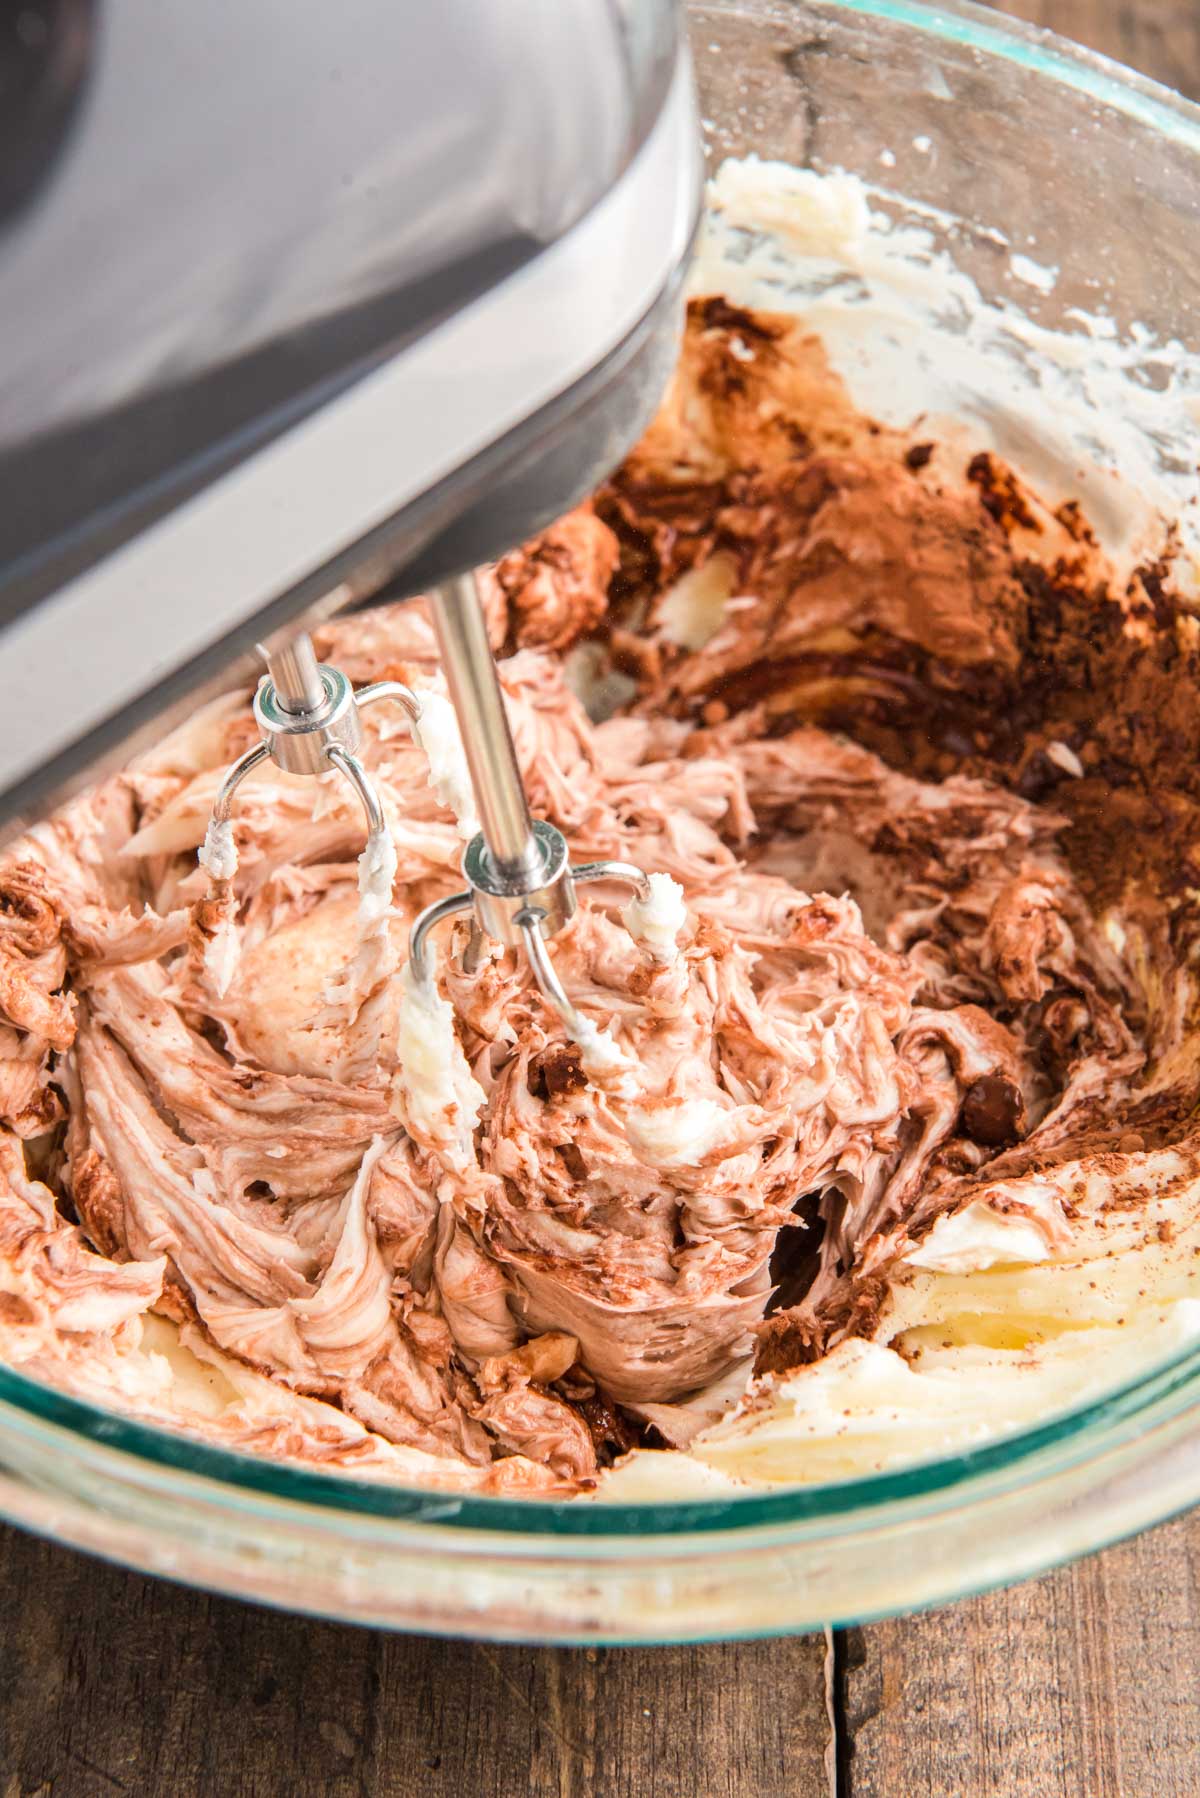 Chocolate buttercream being made in a glass bowl with a hand mixer.